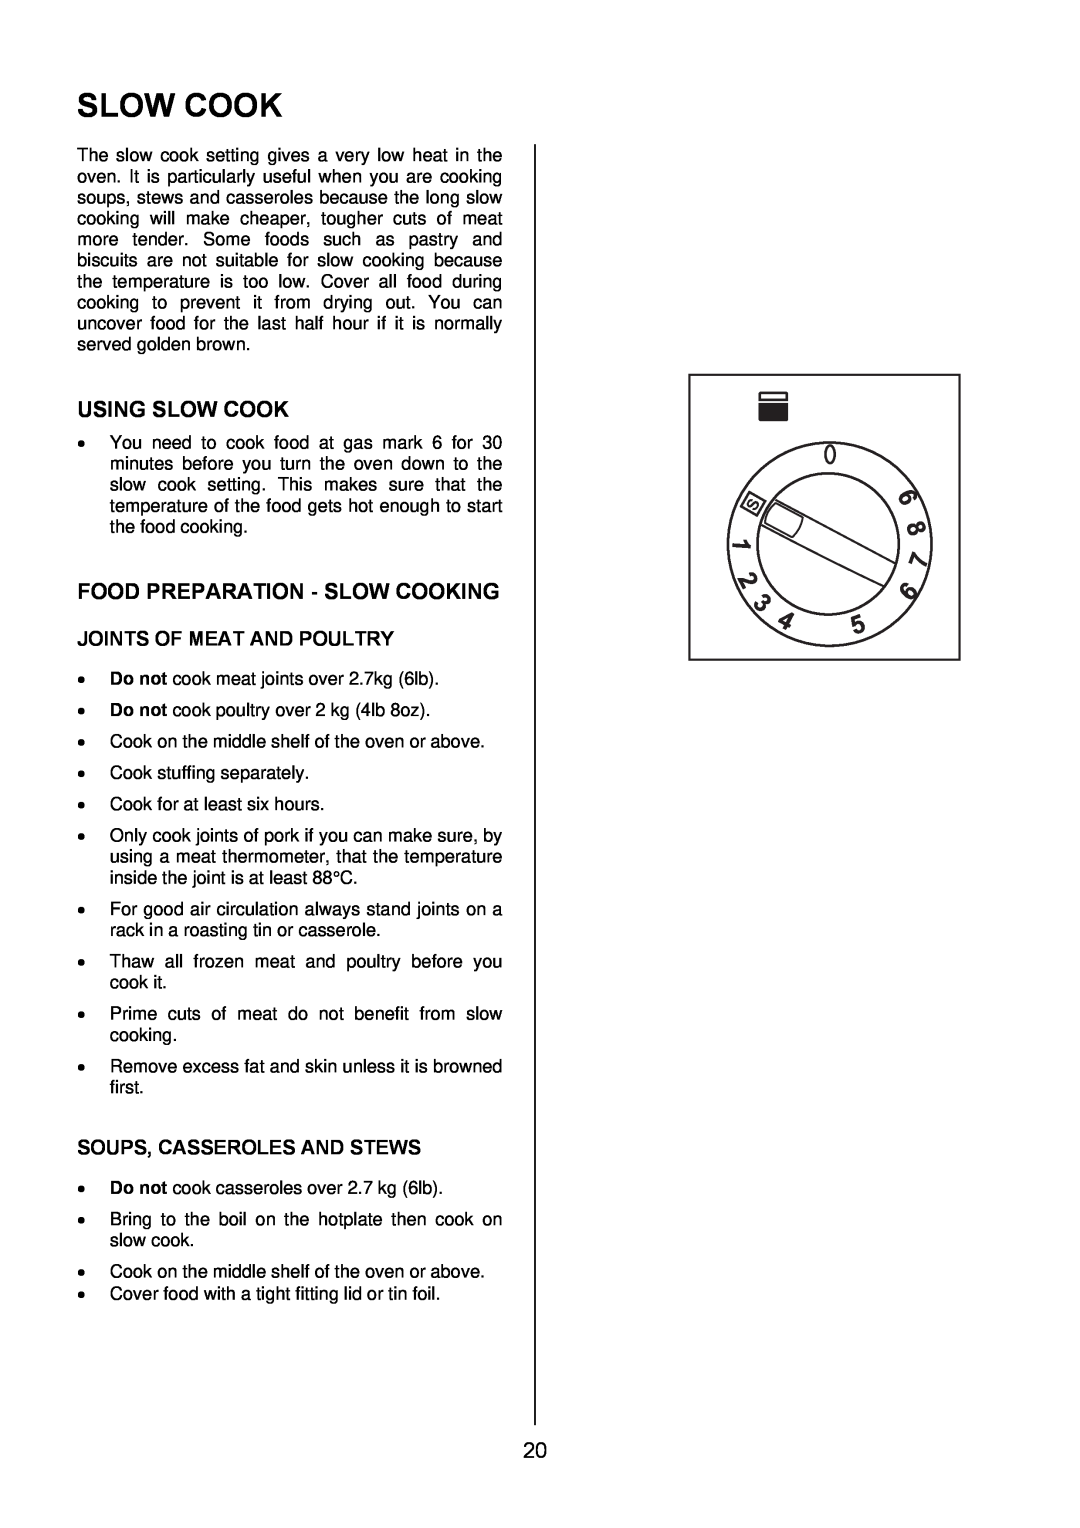 Electrolux EIKG6047, EIKG6046 user manual Using Slow Cook, Food Preparation - Slow Cooking, Joints Of Meat And Poultry 